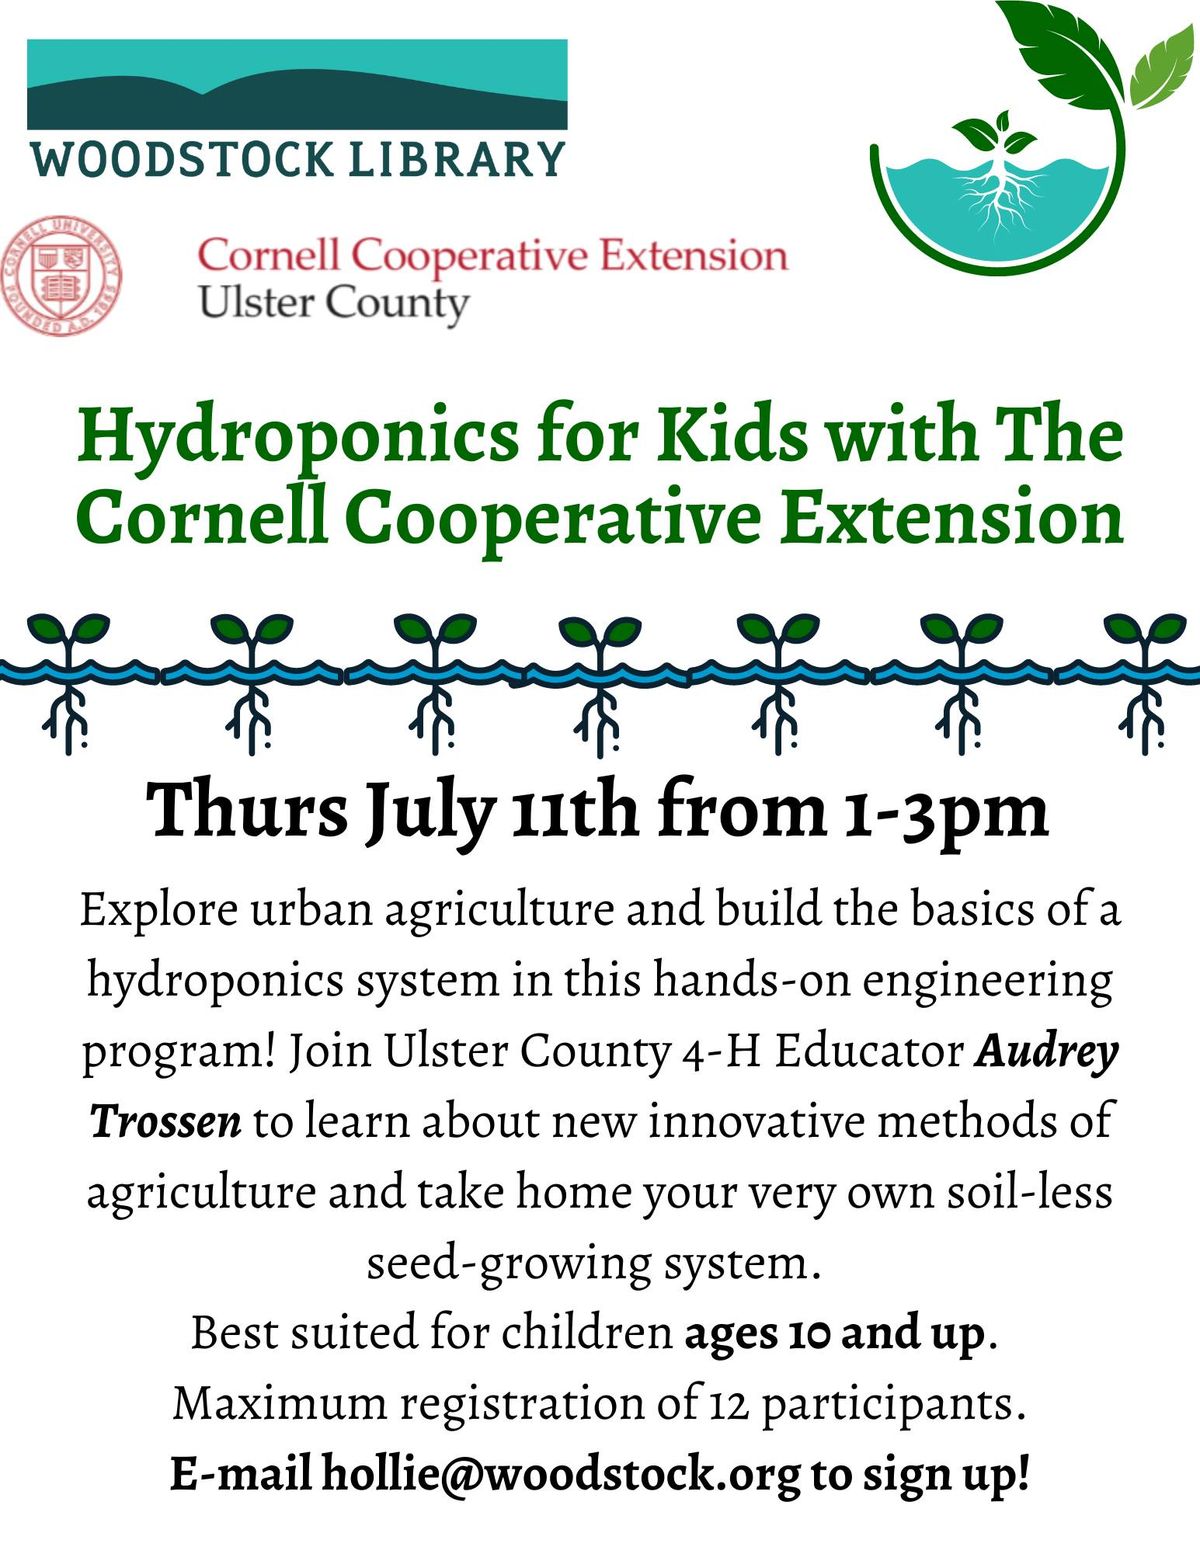 Hydroponics for Kids with The Cornell Cooperative Extension